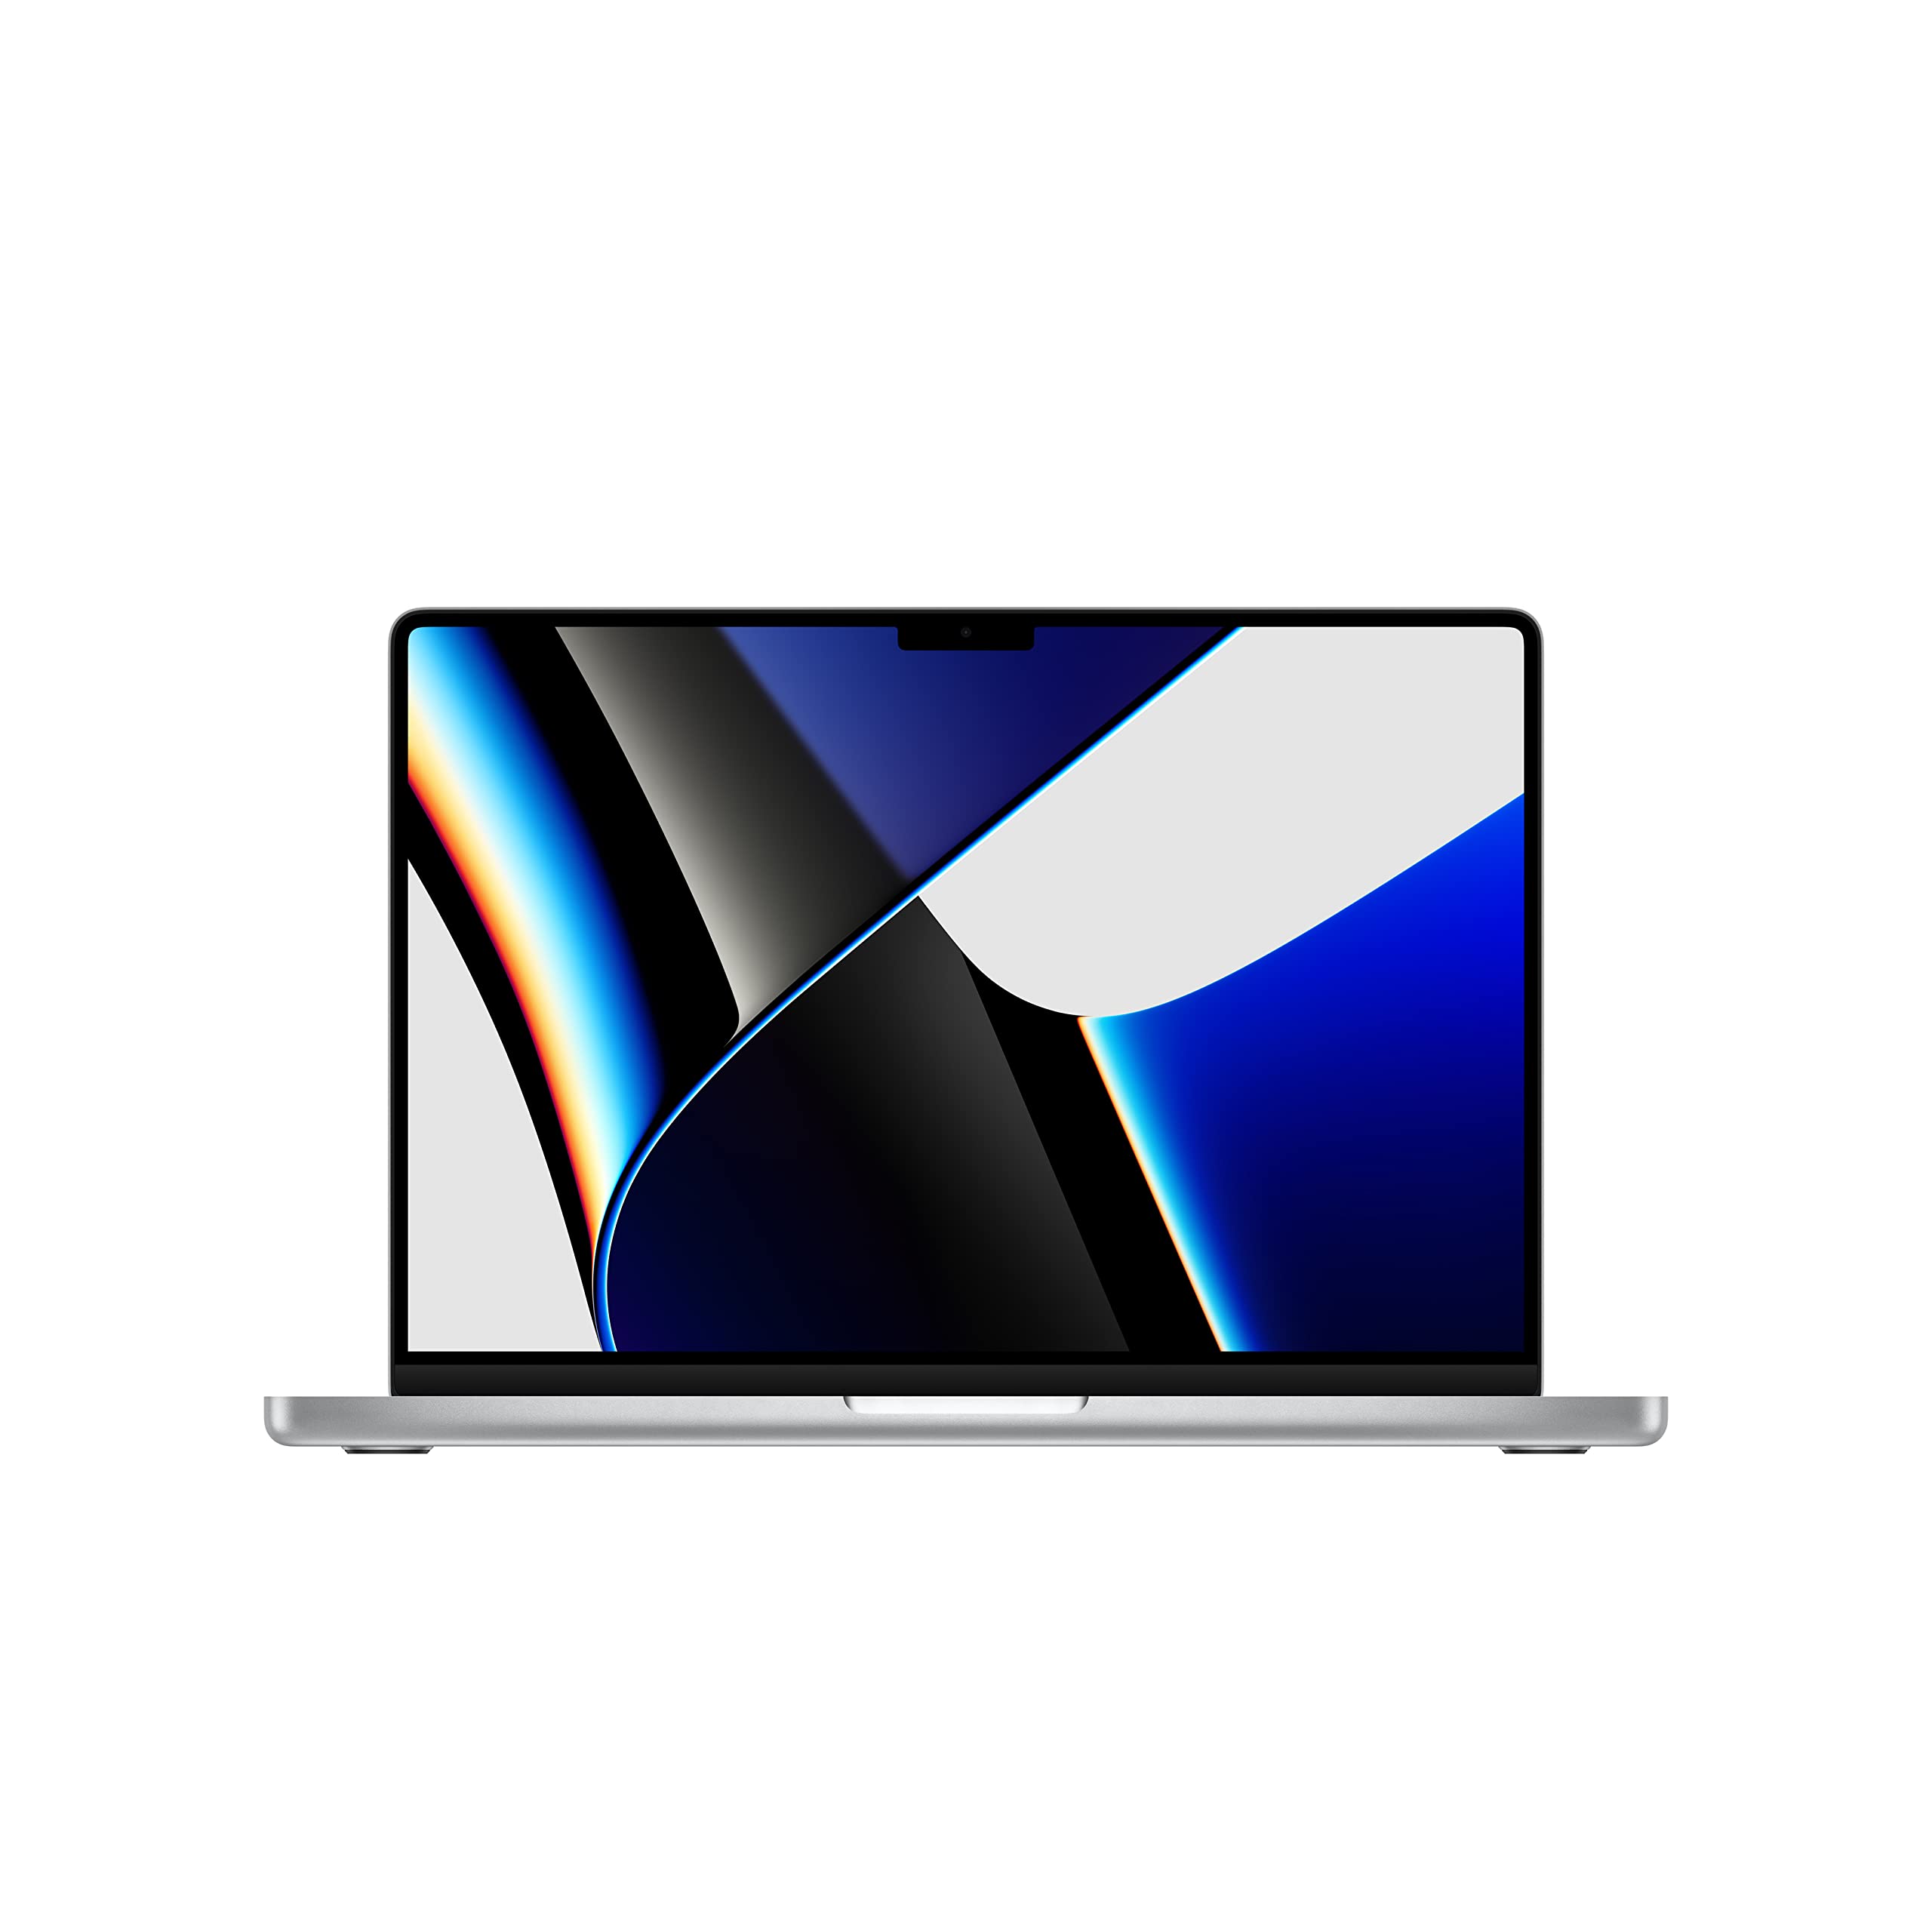 YMMV Select Costco Wholesale (In Store): Macbook Pro 14" with M1 chip for $1400.00